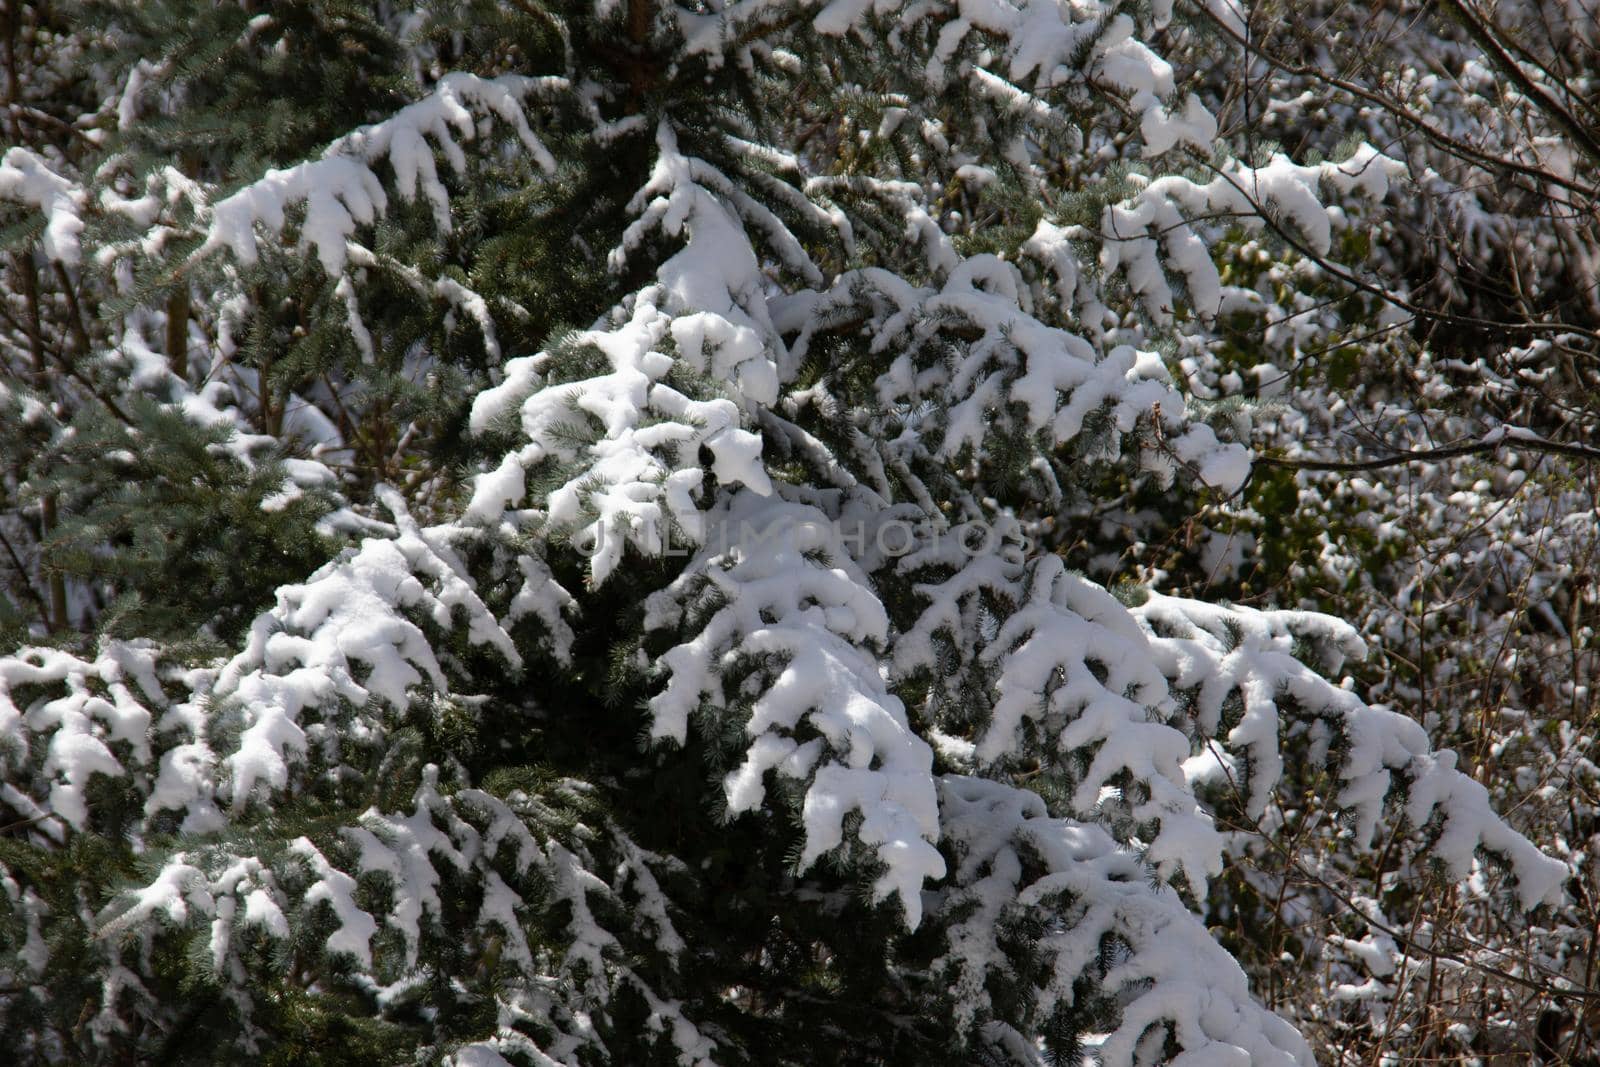 Snow-covered conifers stand in the winter landscape